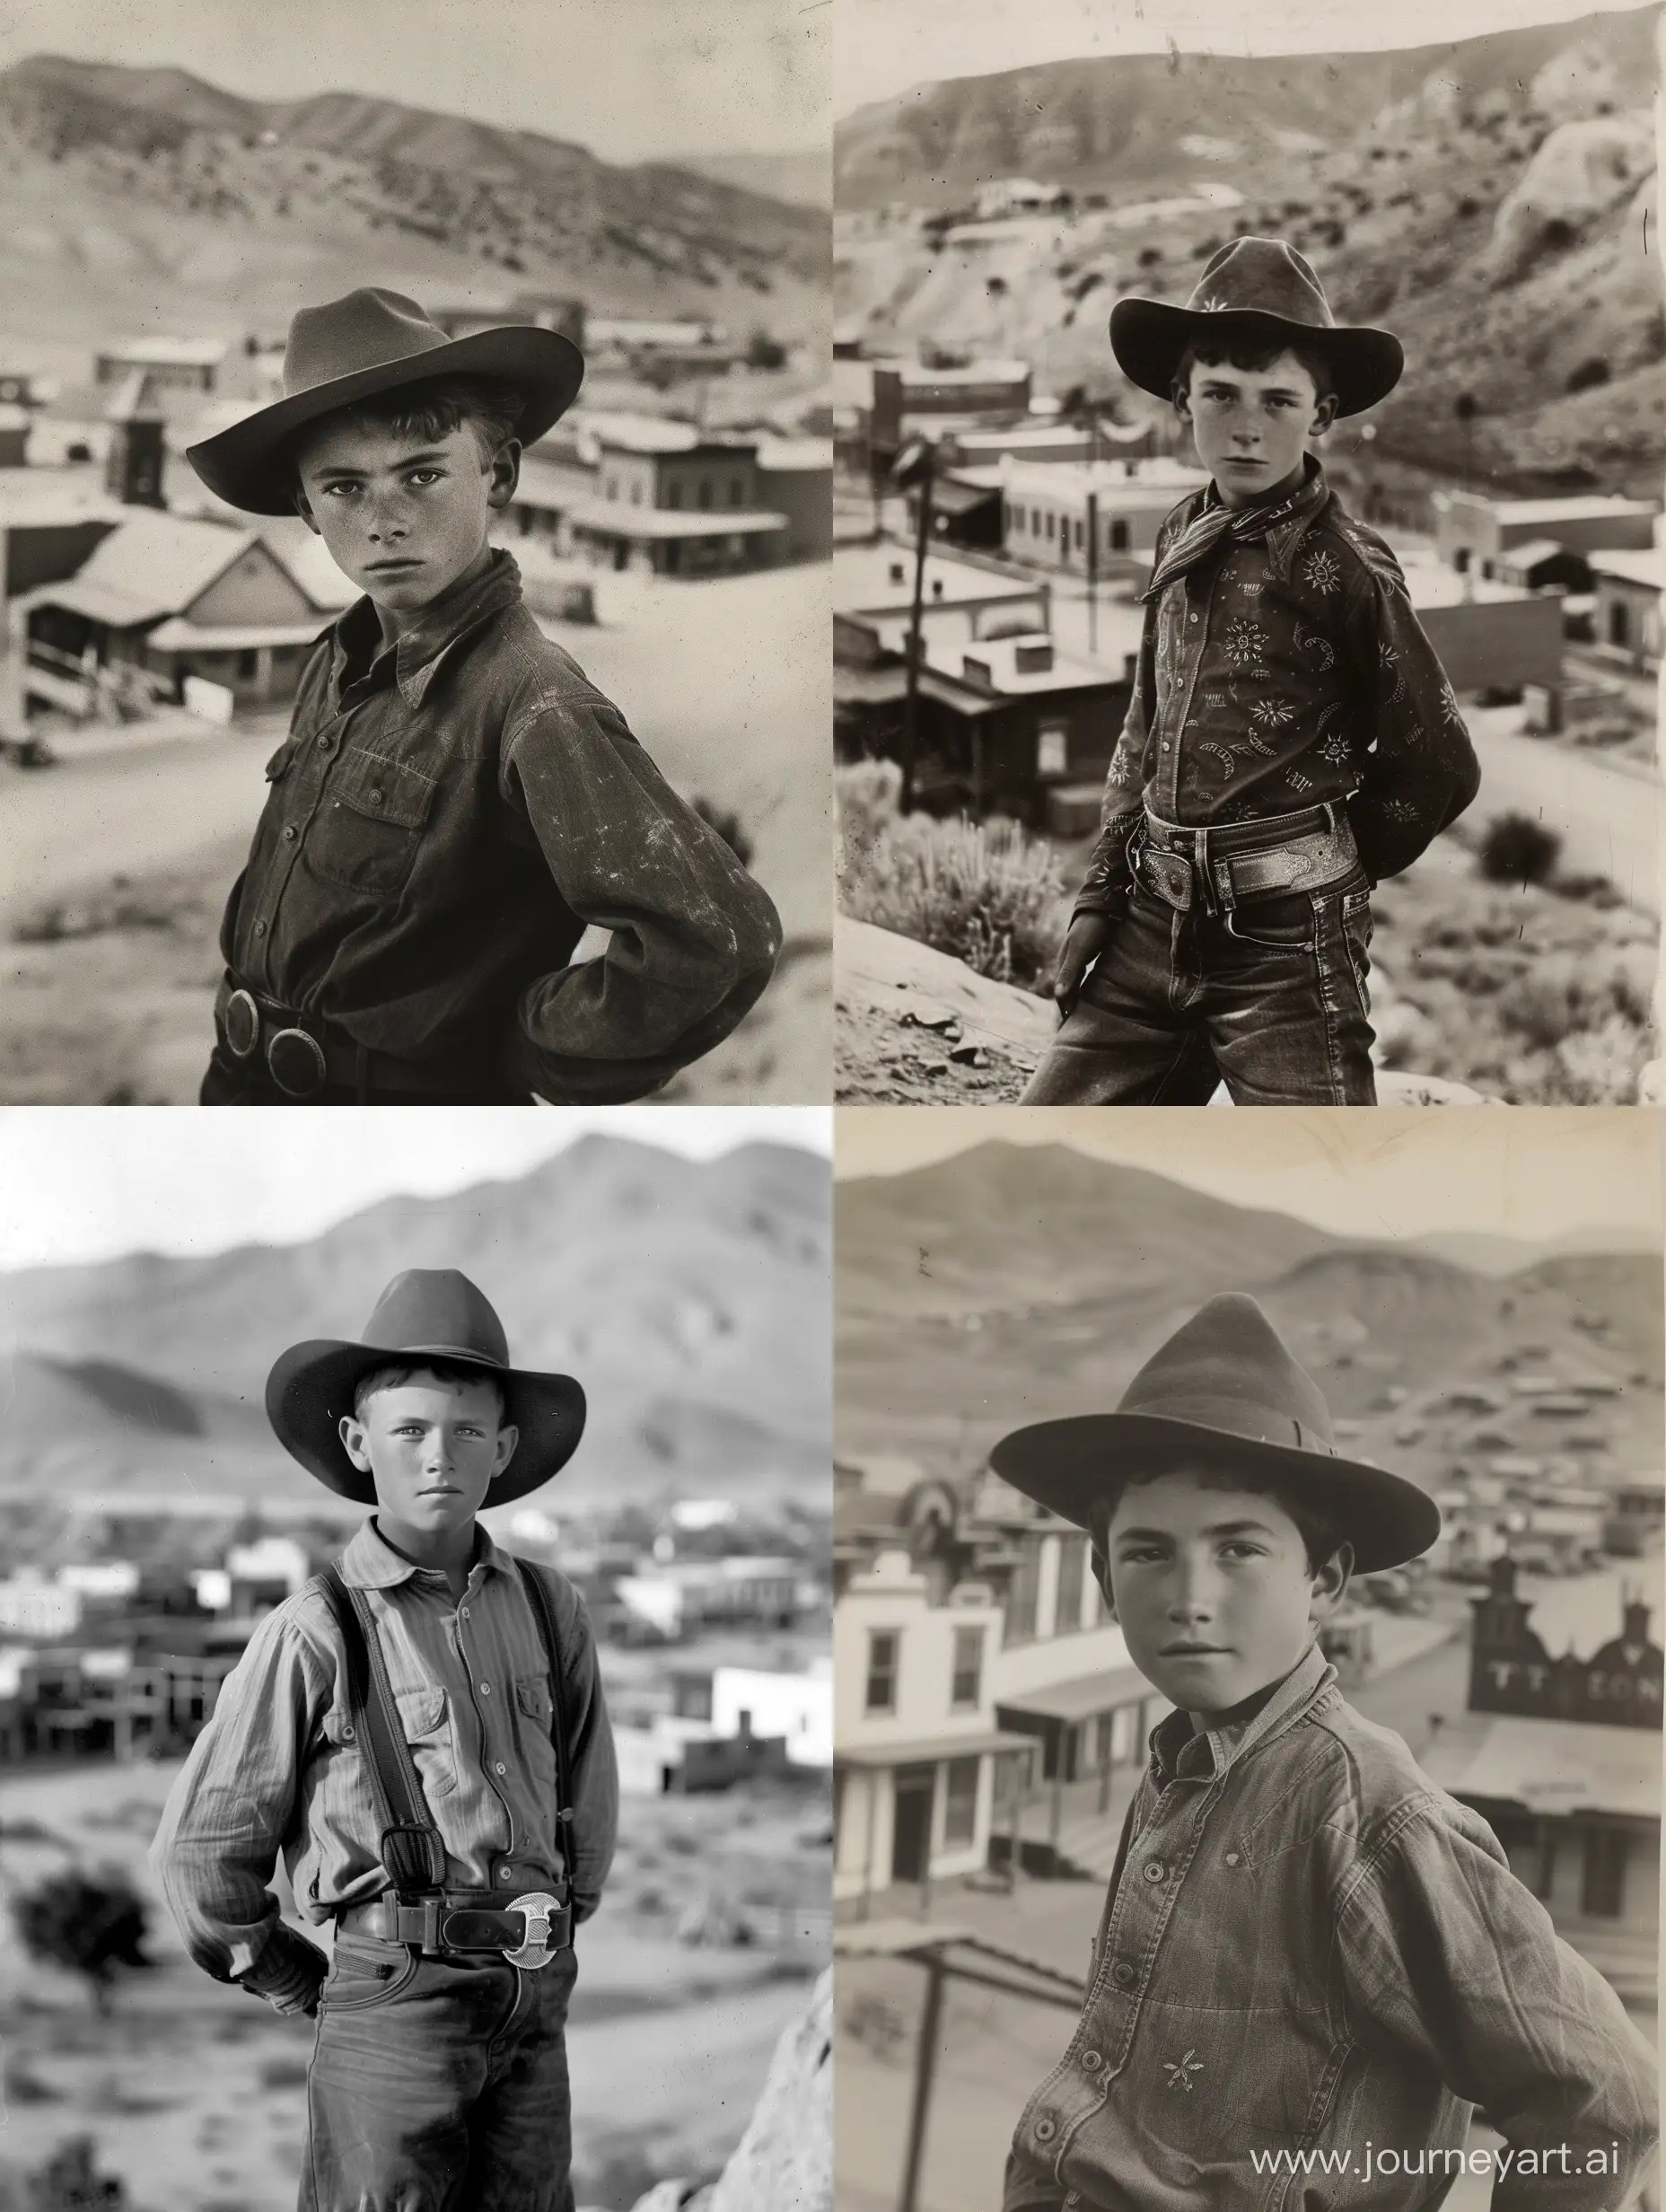 Young-Cowboy-Posing-in-Old-West-Town-Vintage-Black-and-White-Photograph